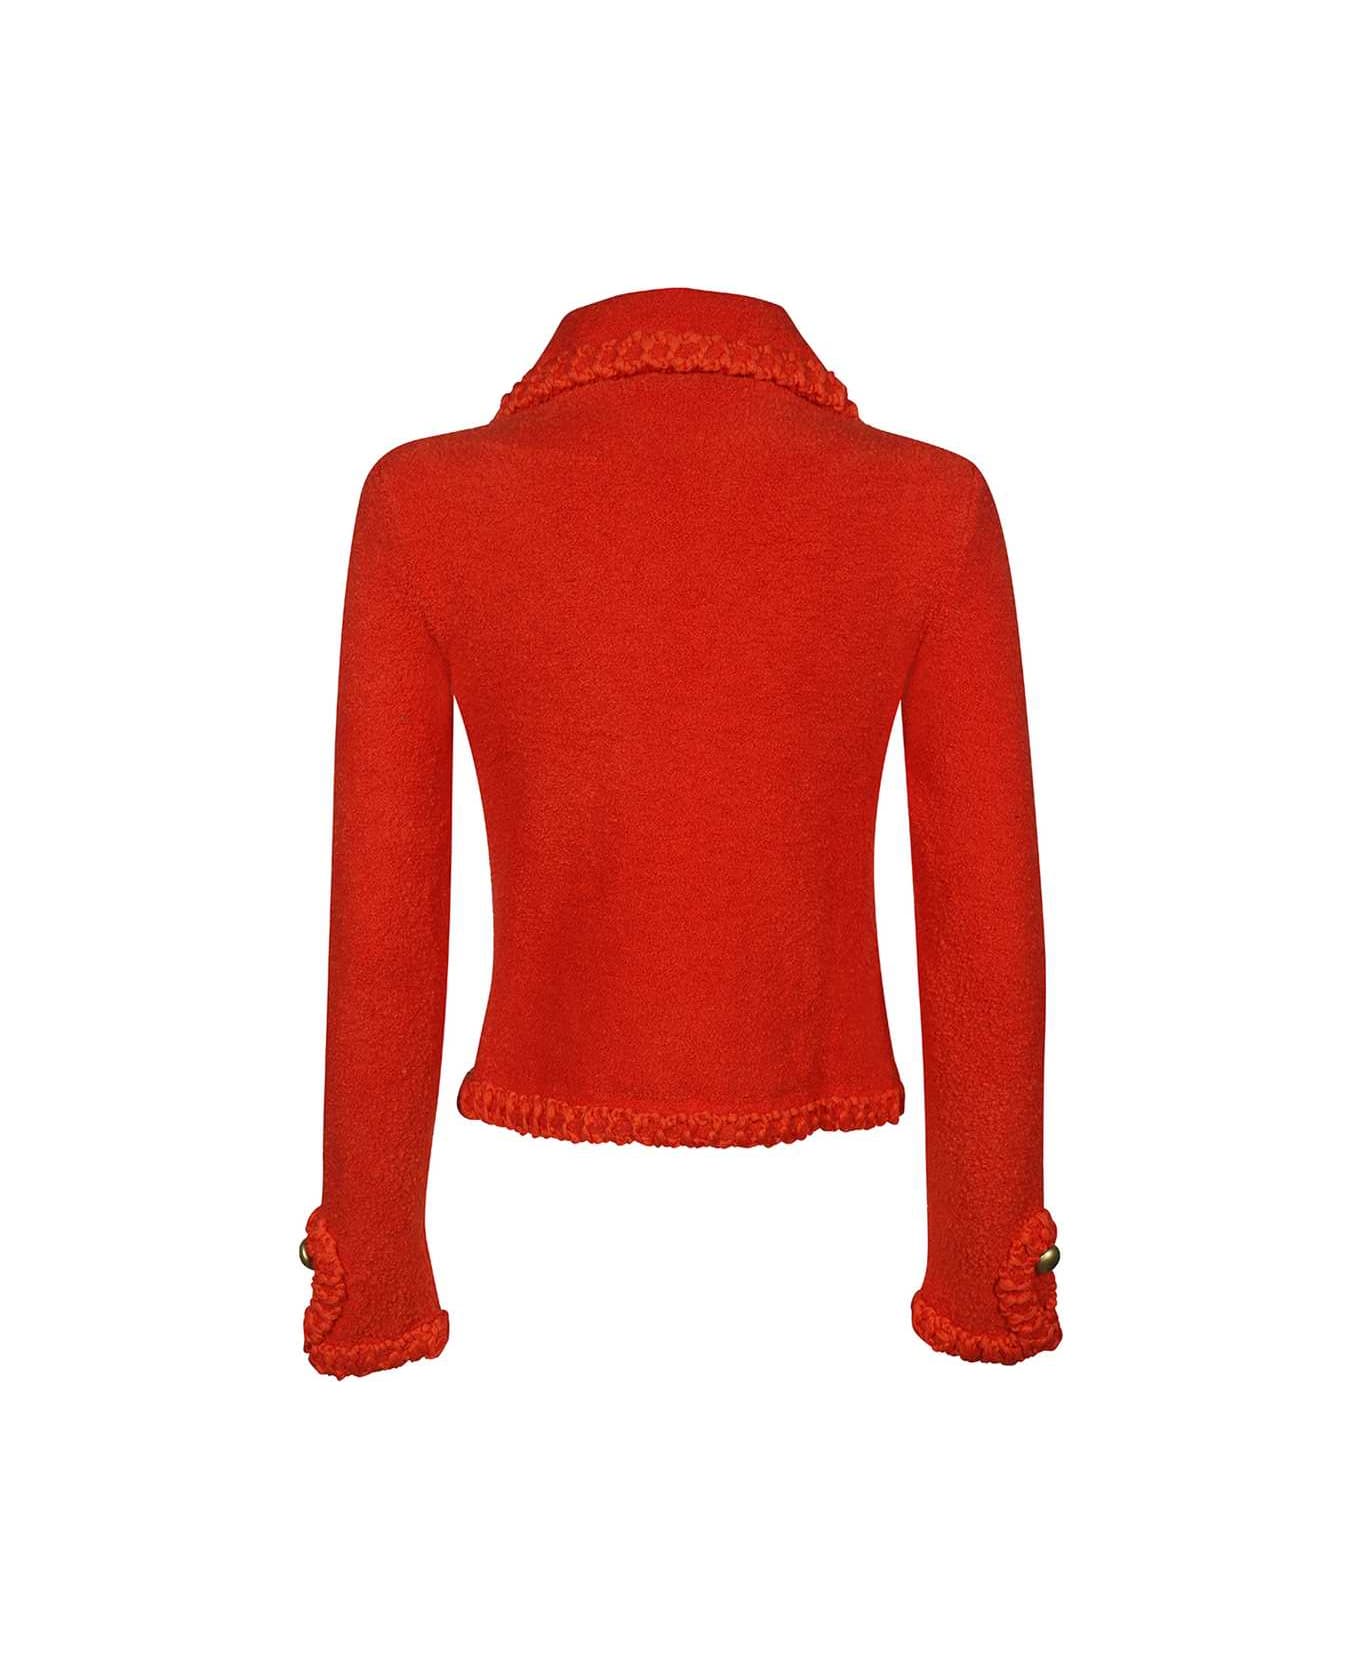 Moschino Single-breasted Cotton Blazer - red カーディガン